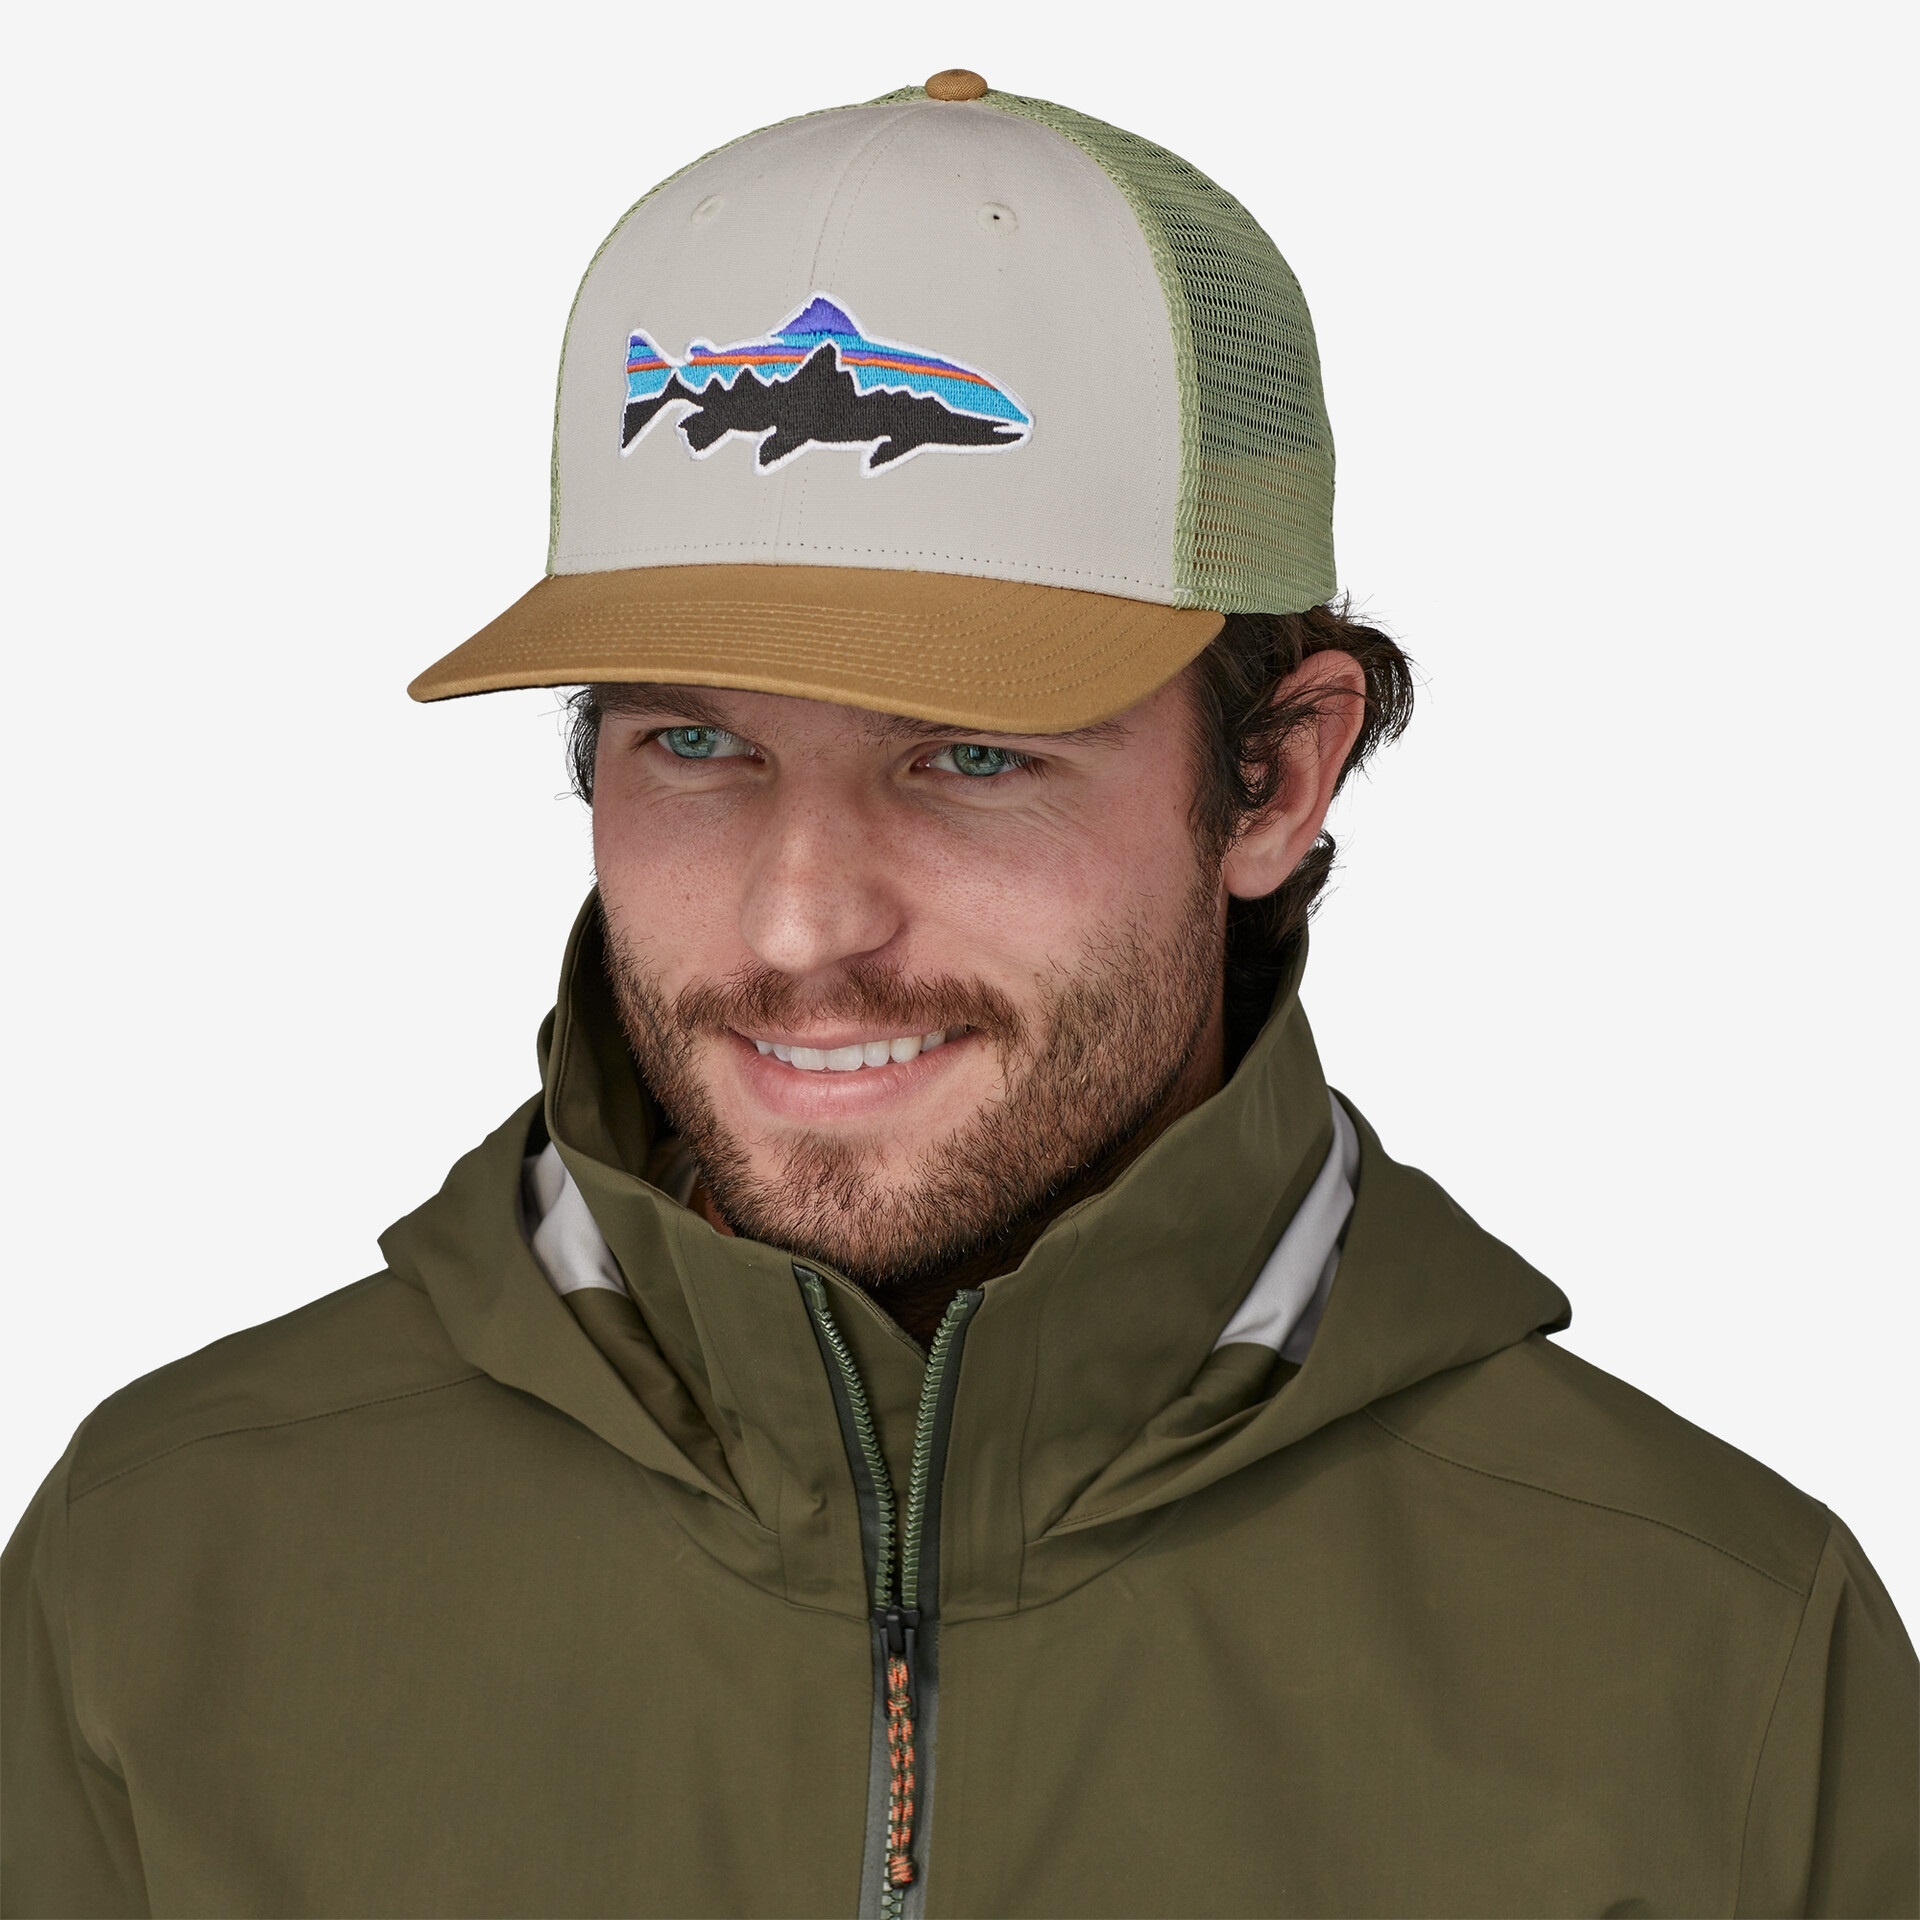 Patagonia Fitz Roy Trout Trucker Hat - White w/Classic Tan - RIGS Fly Shop